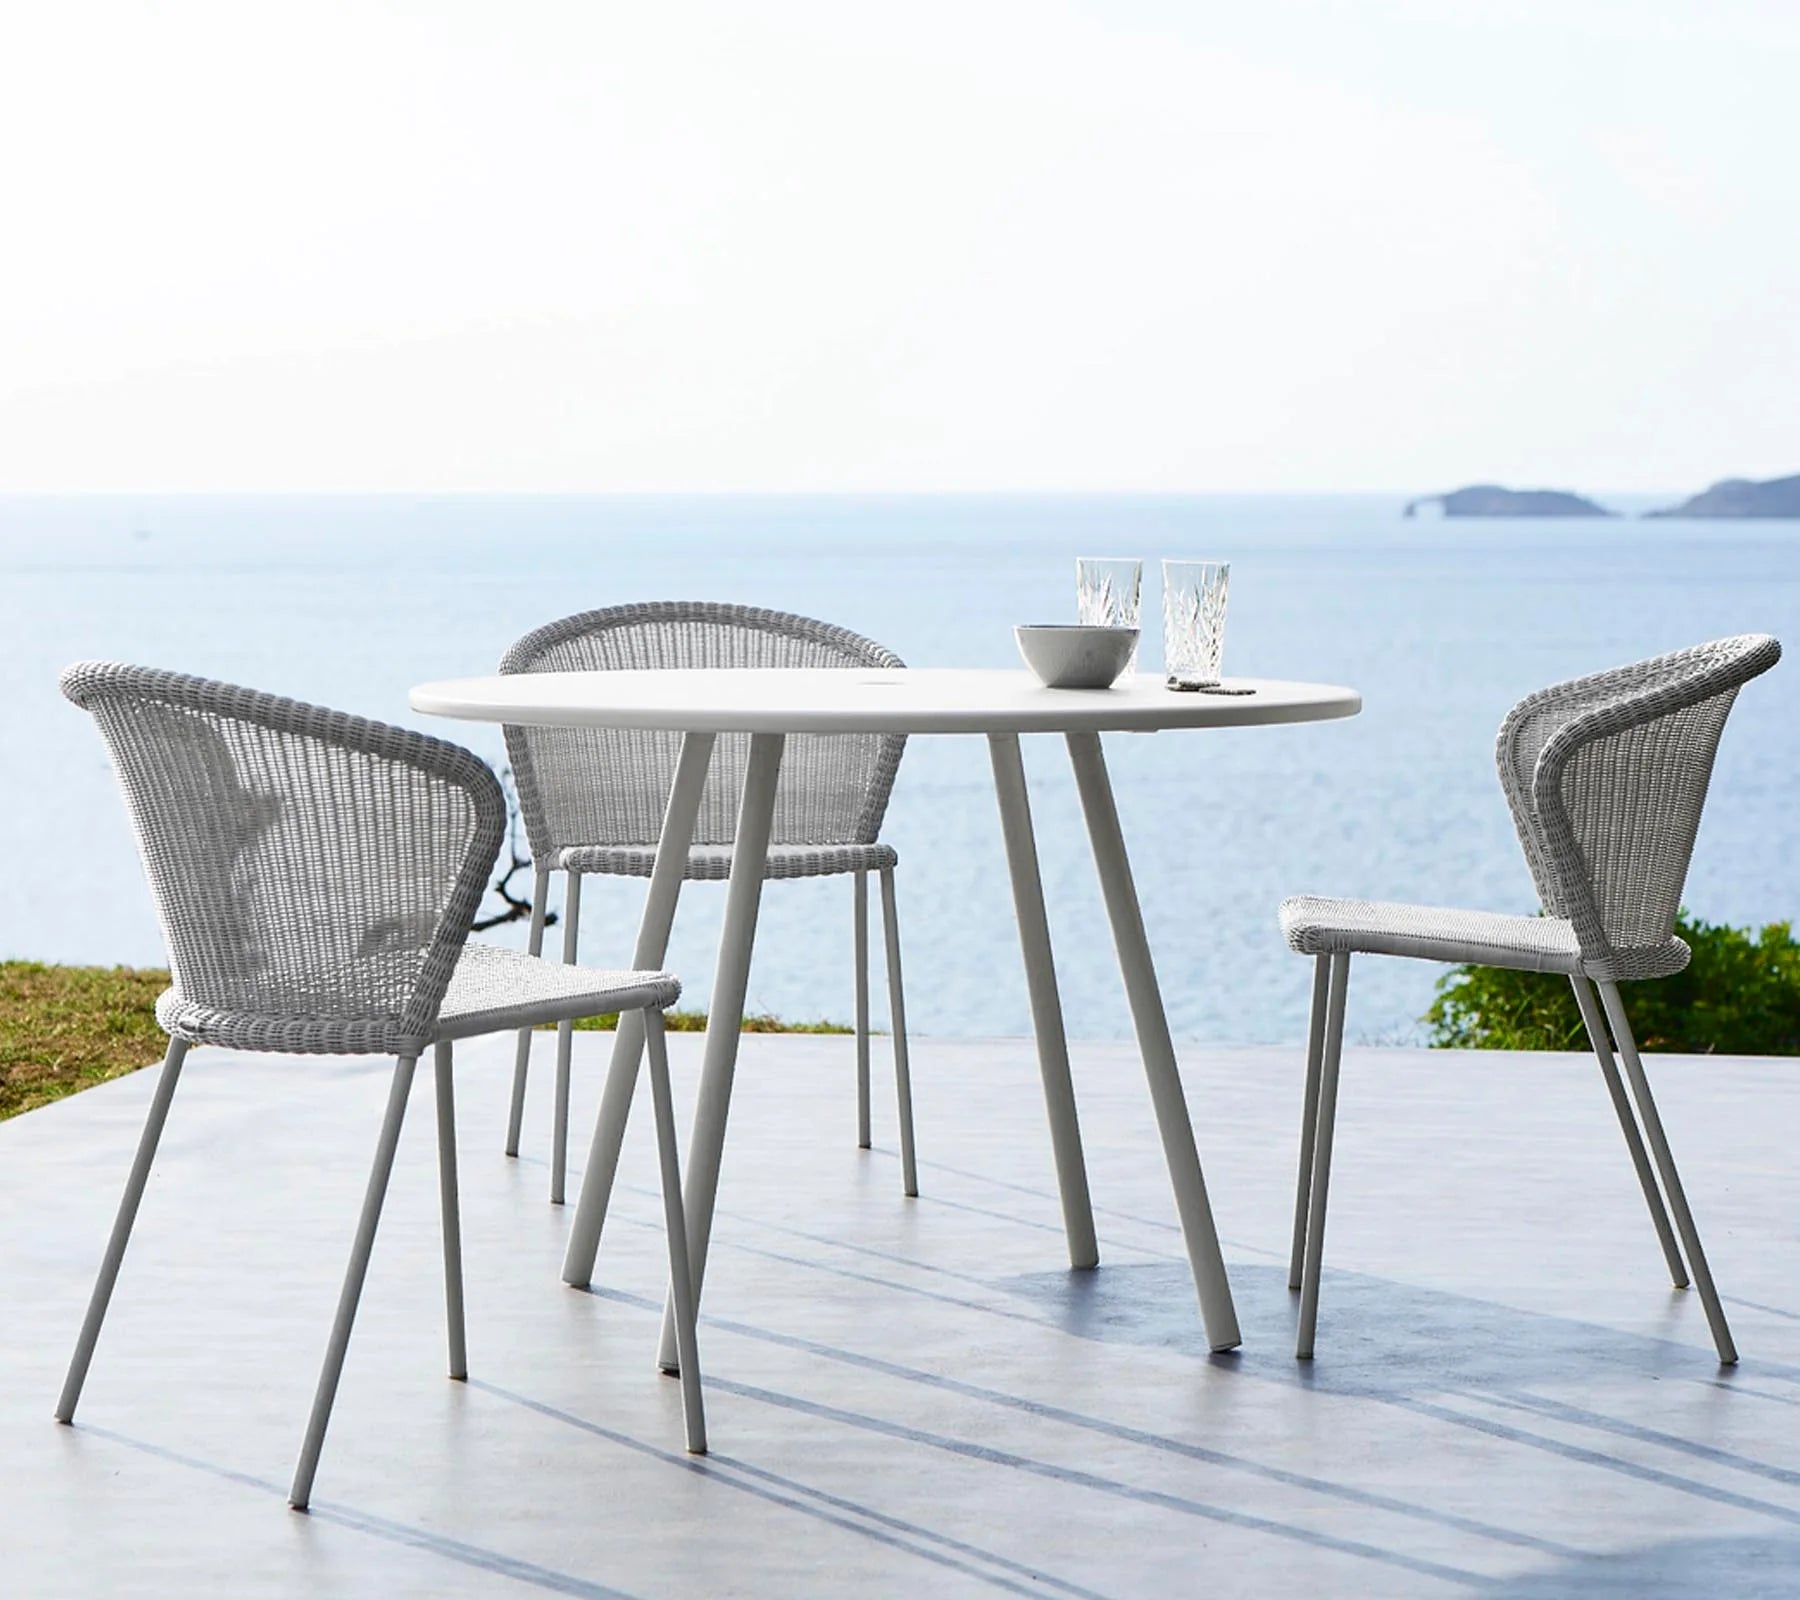 Boxhill's Lean Stackable Outdoor Garden Chair White Grey lifestyle image at seafront with white round table and 2 glasses and a bowl on top